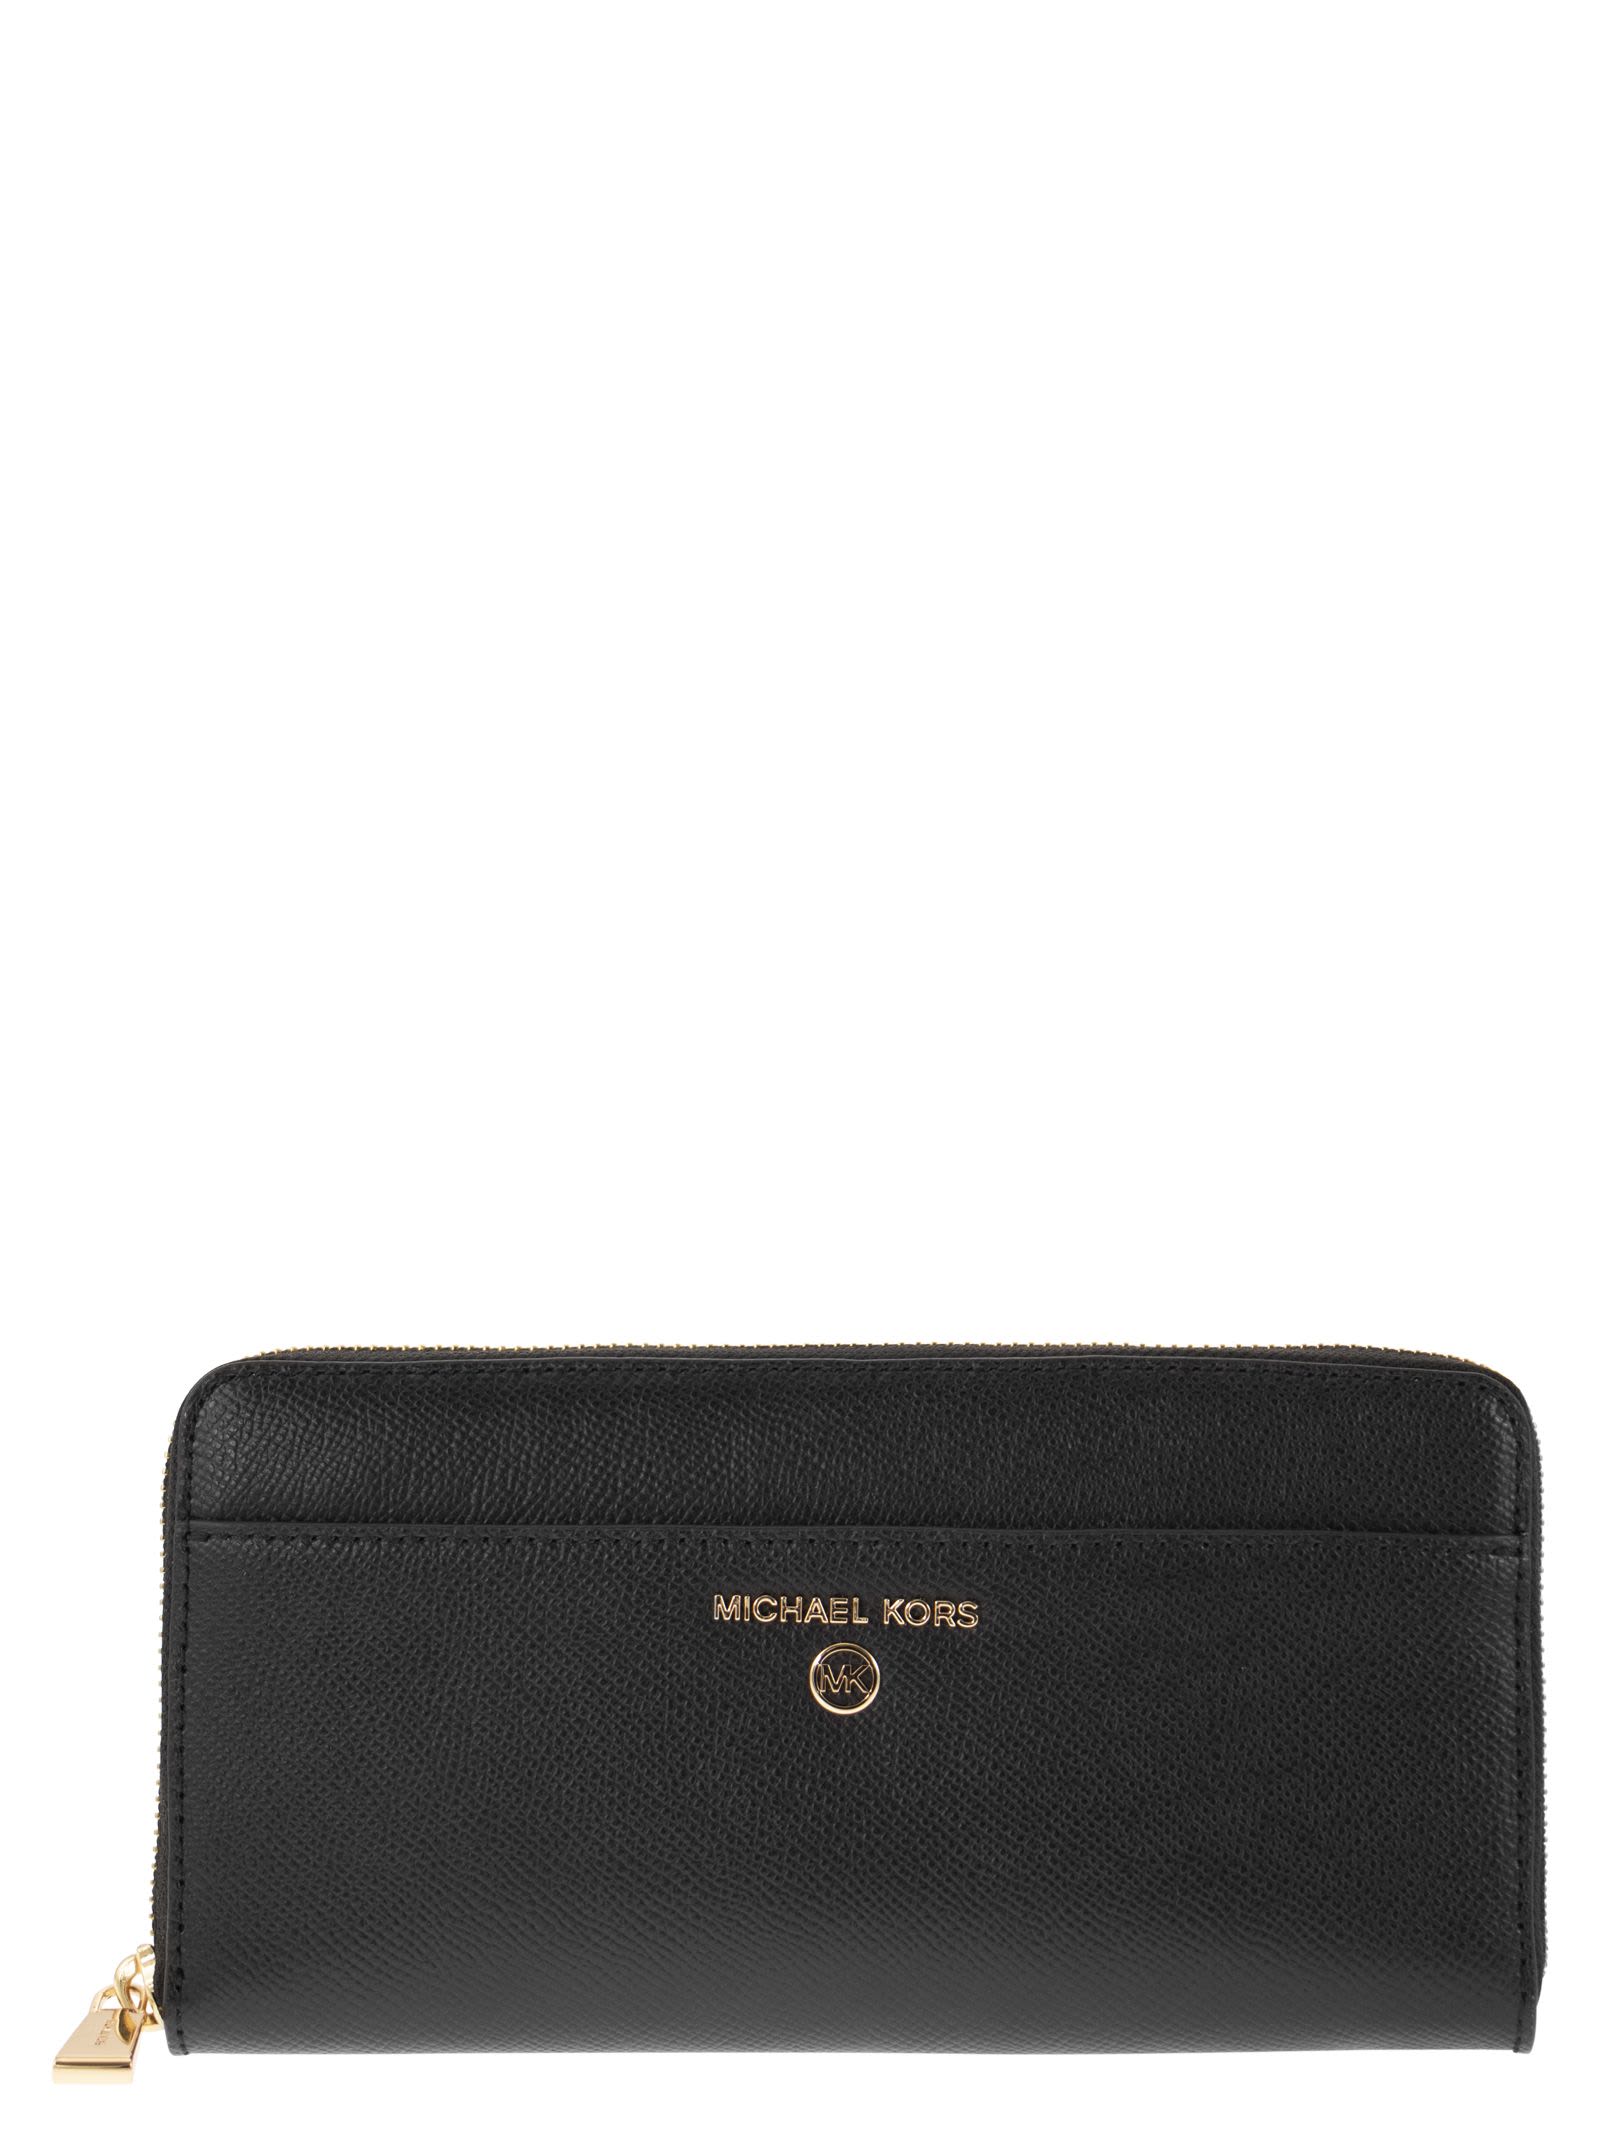 MICHAEL KORS CONTINENTAL WALLET WITH LOGO